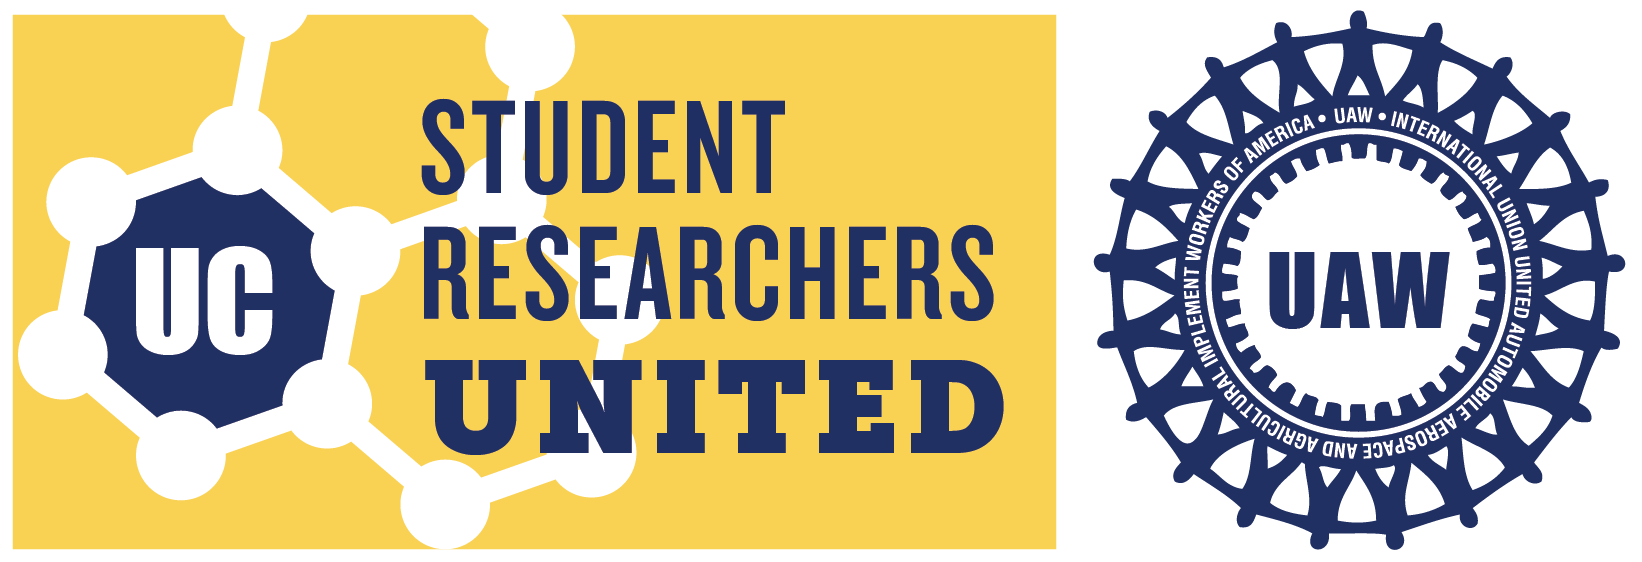 Student Researchers United